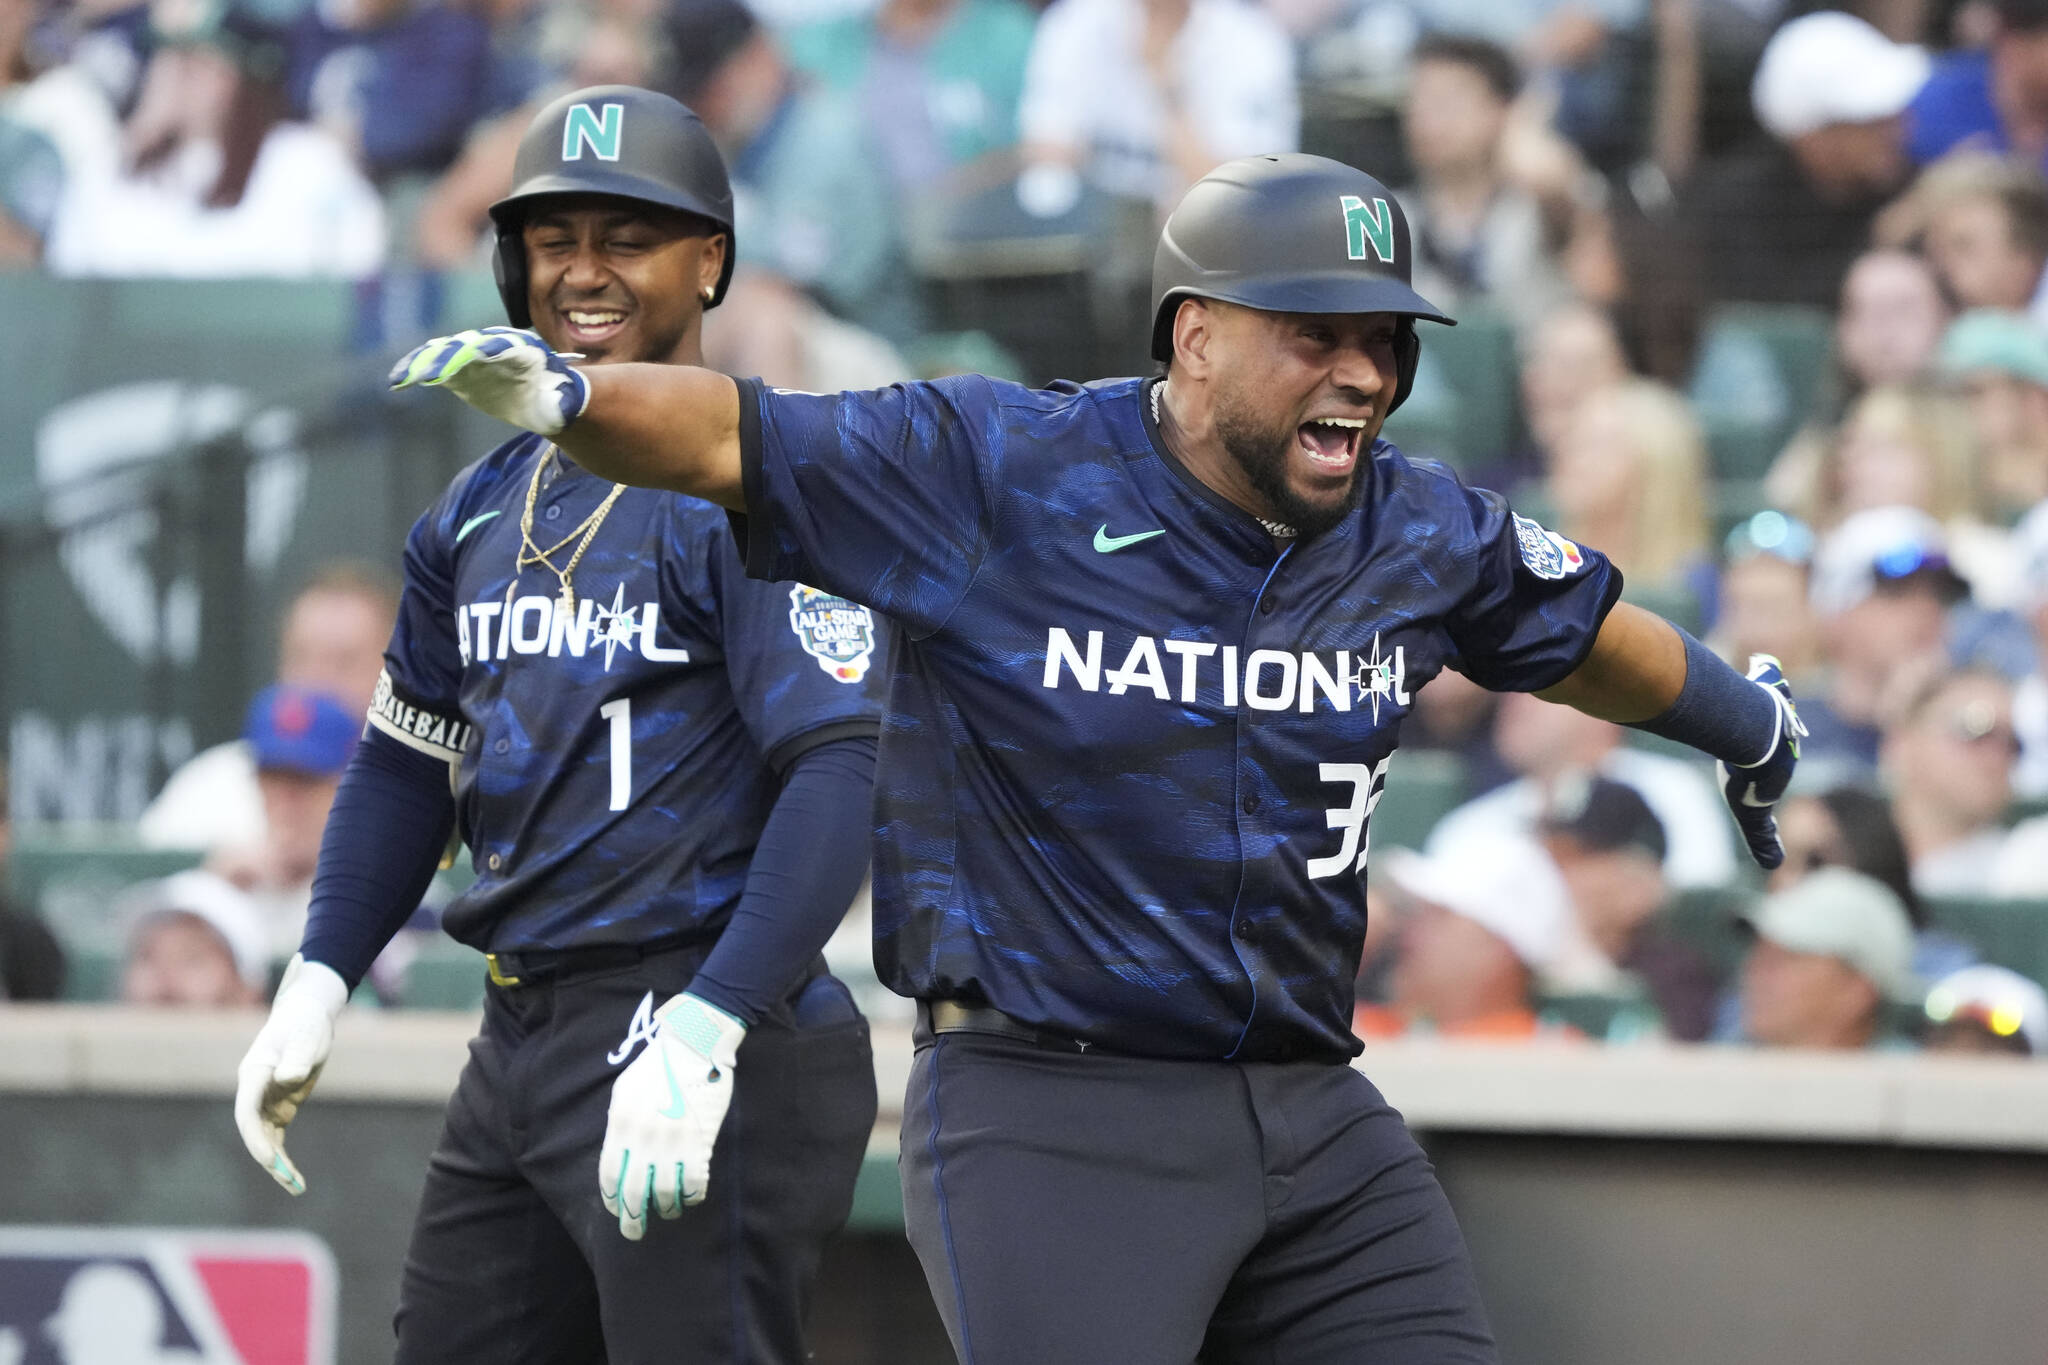 The National League’s Elias Díaz, of the Colorado Rockies, celebrates his two run home run with Ozzie Albies, of the Atlanta Braves, during the eighth inning of the MLB All-Star game on Tuesday in Seattle. (AP Photo/Ted S. Warren)